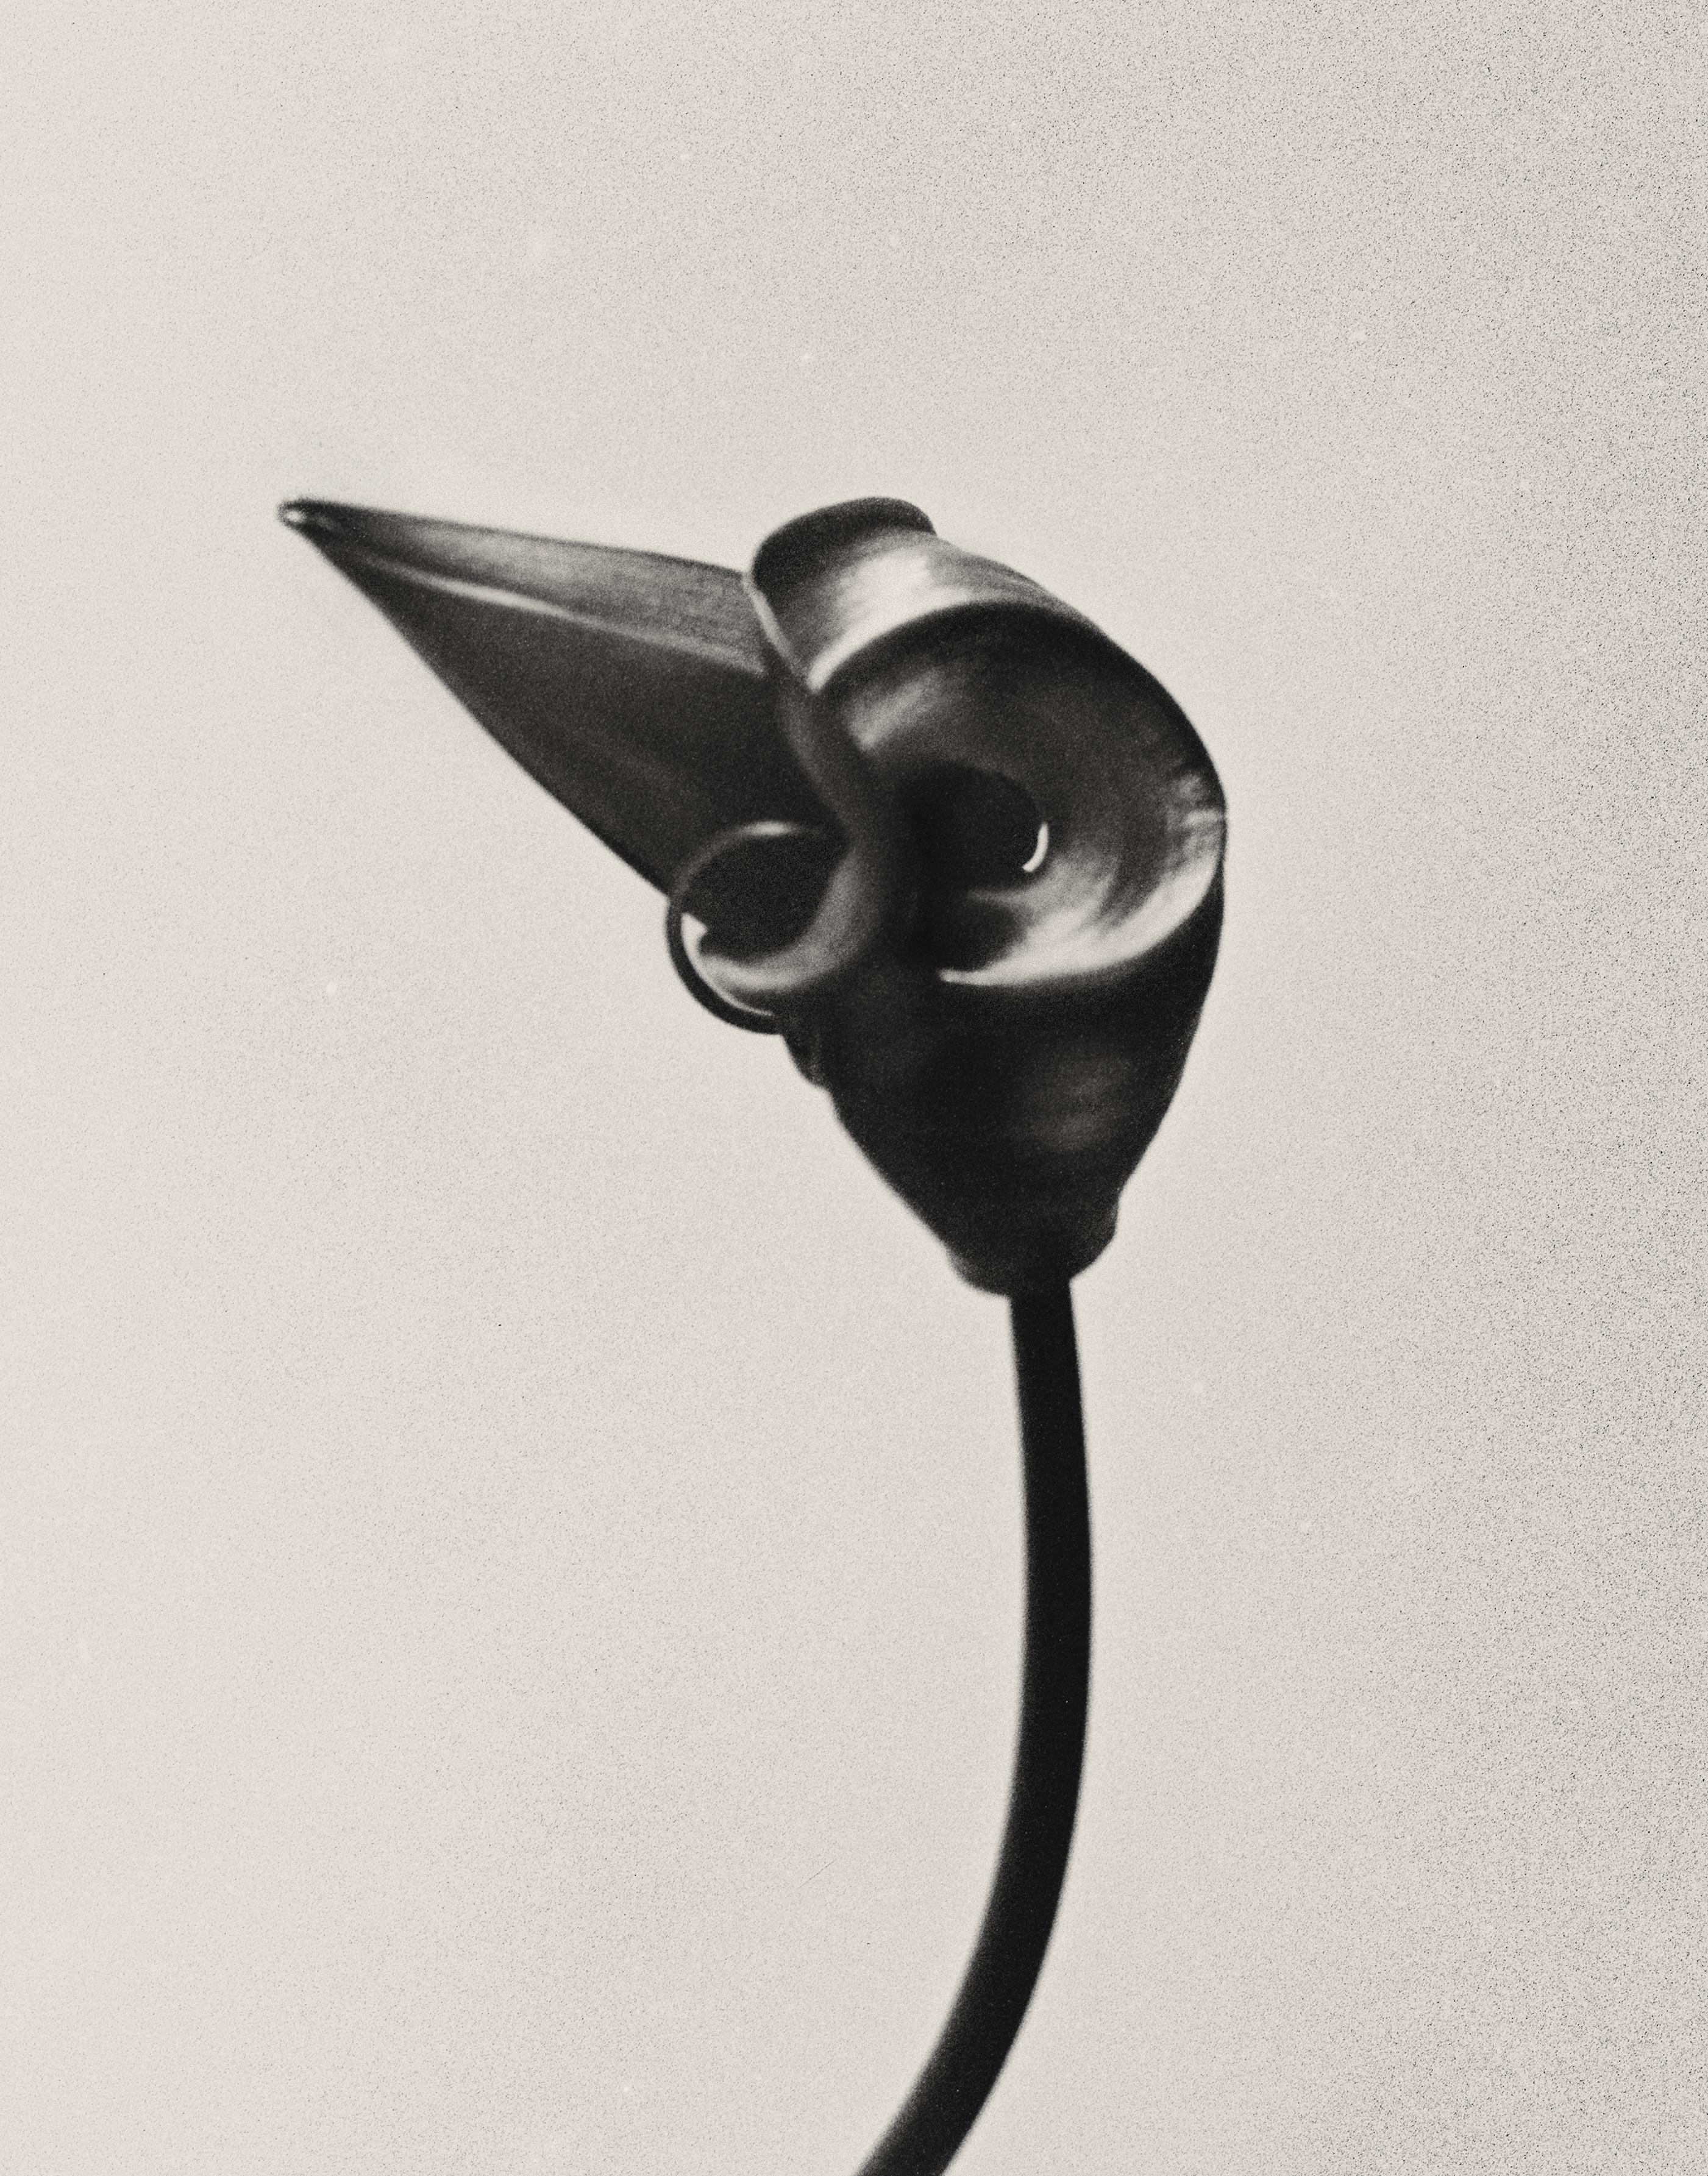 Ugne Pouwell Still-Life Photograph - Gloriosa bud - black and white floral photography, limited edition of 20